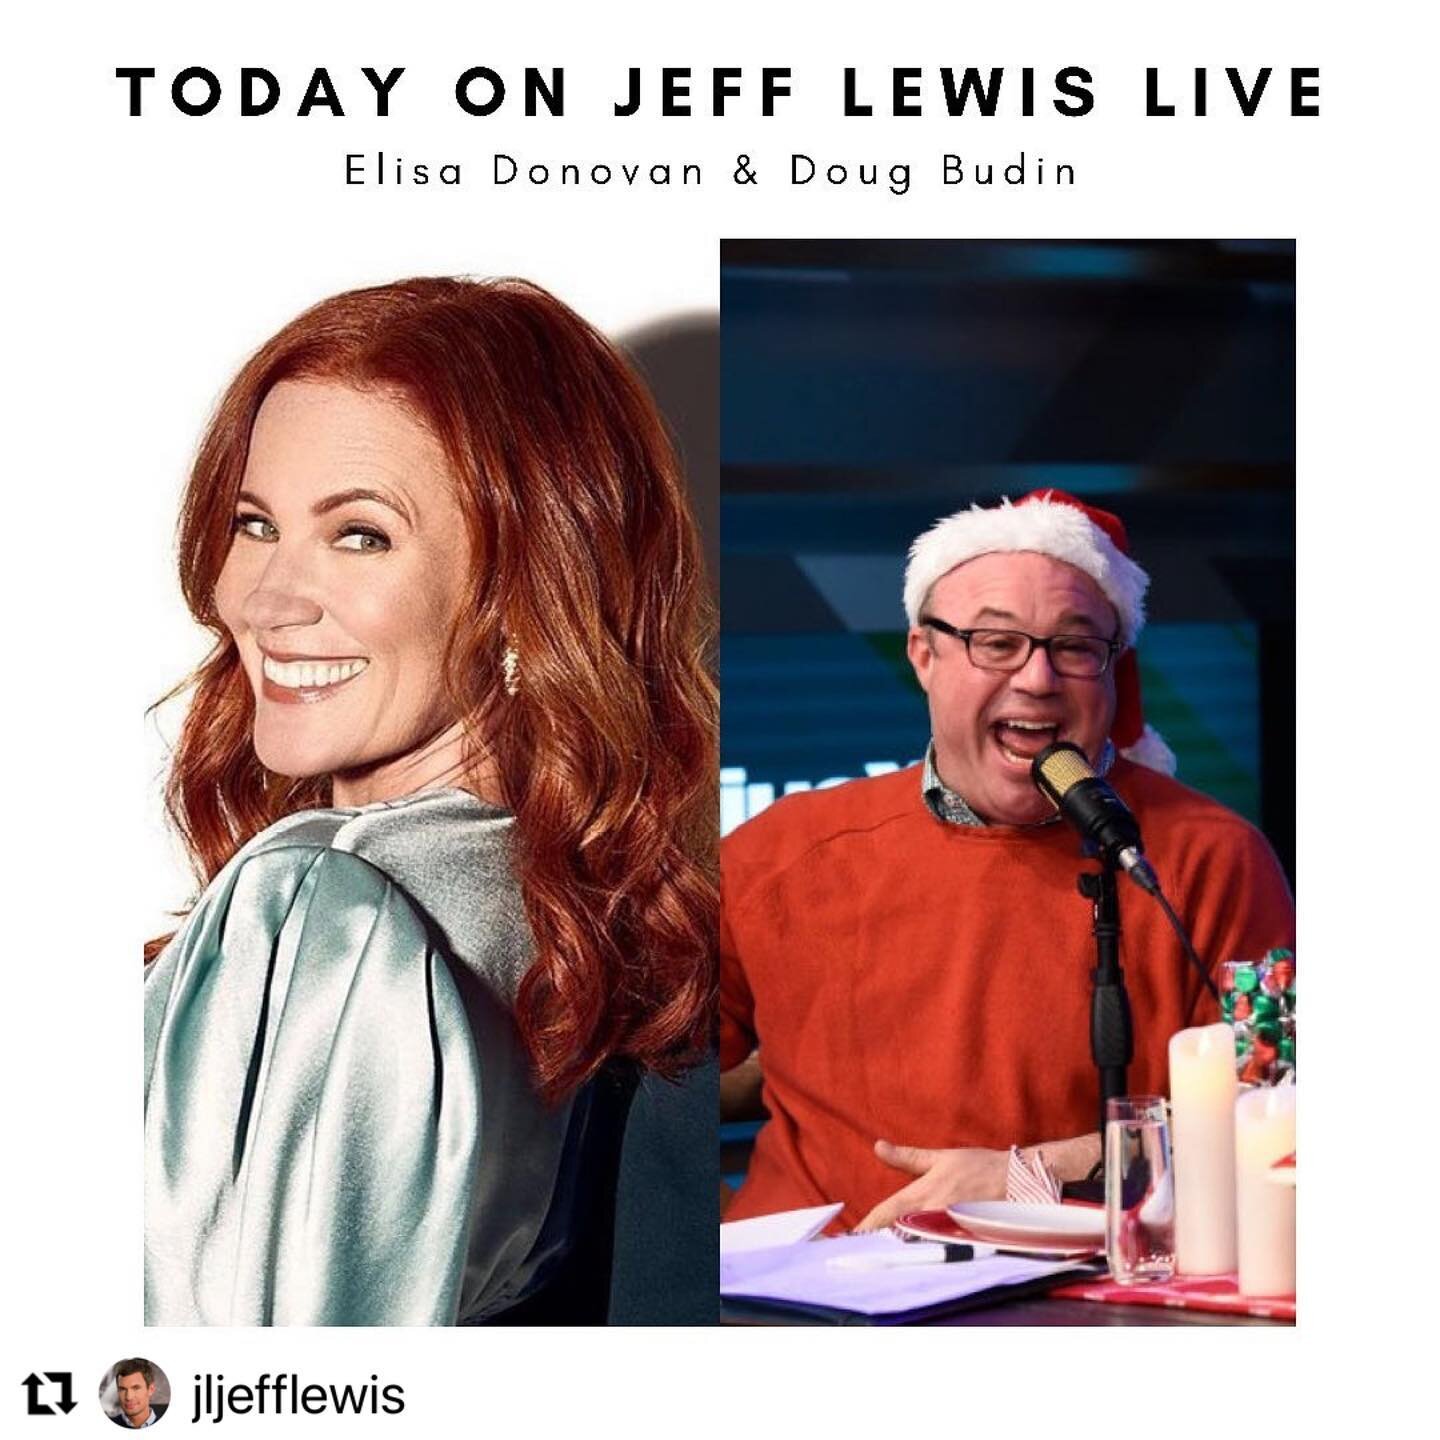 Always BIG FUN on @jljefflewis #JeffLewisLive 😂😍 #Repost @jljefflewis with @make_repost
・・・
All new Jeff Lewis Live at 9am PT with @reddonovan and @dougbudin on @radioandysxm Channel 102